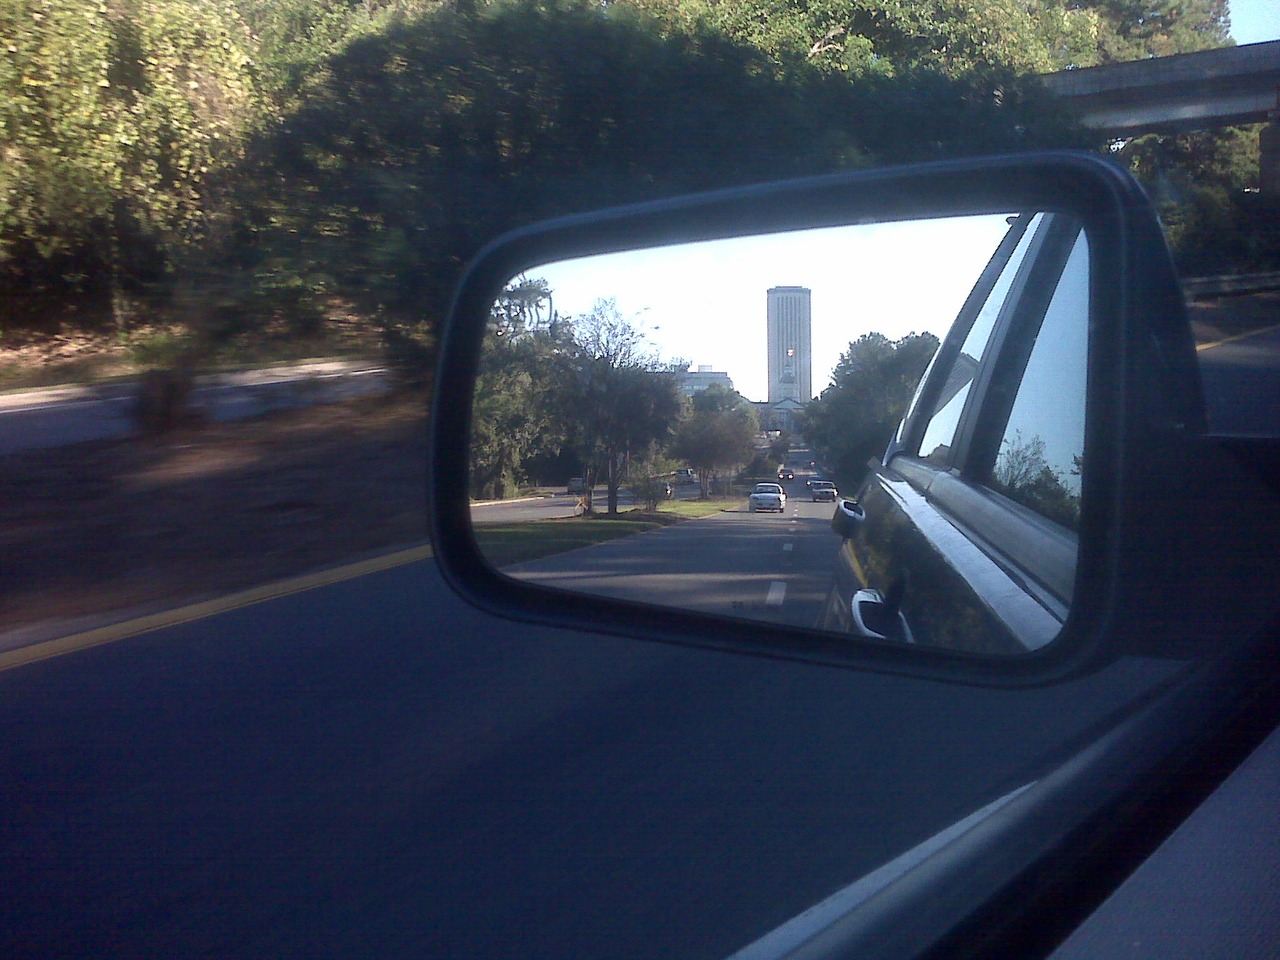 The historic (1845) and modern (1977) Florida State Capitol buildings reflected in my mirror.